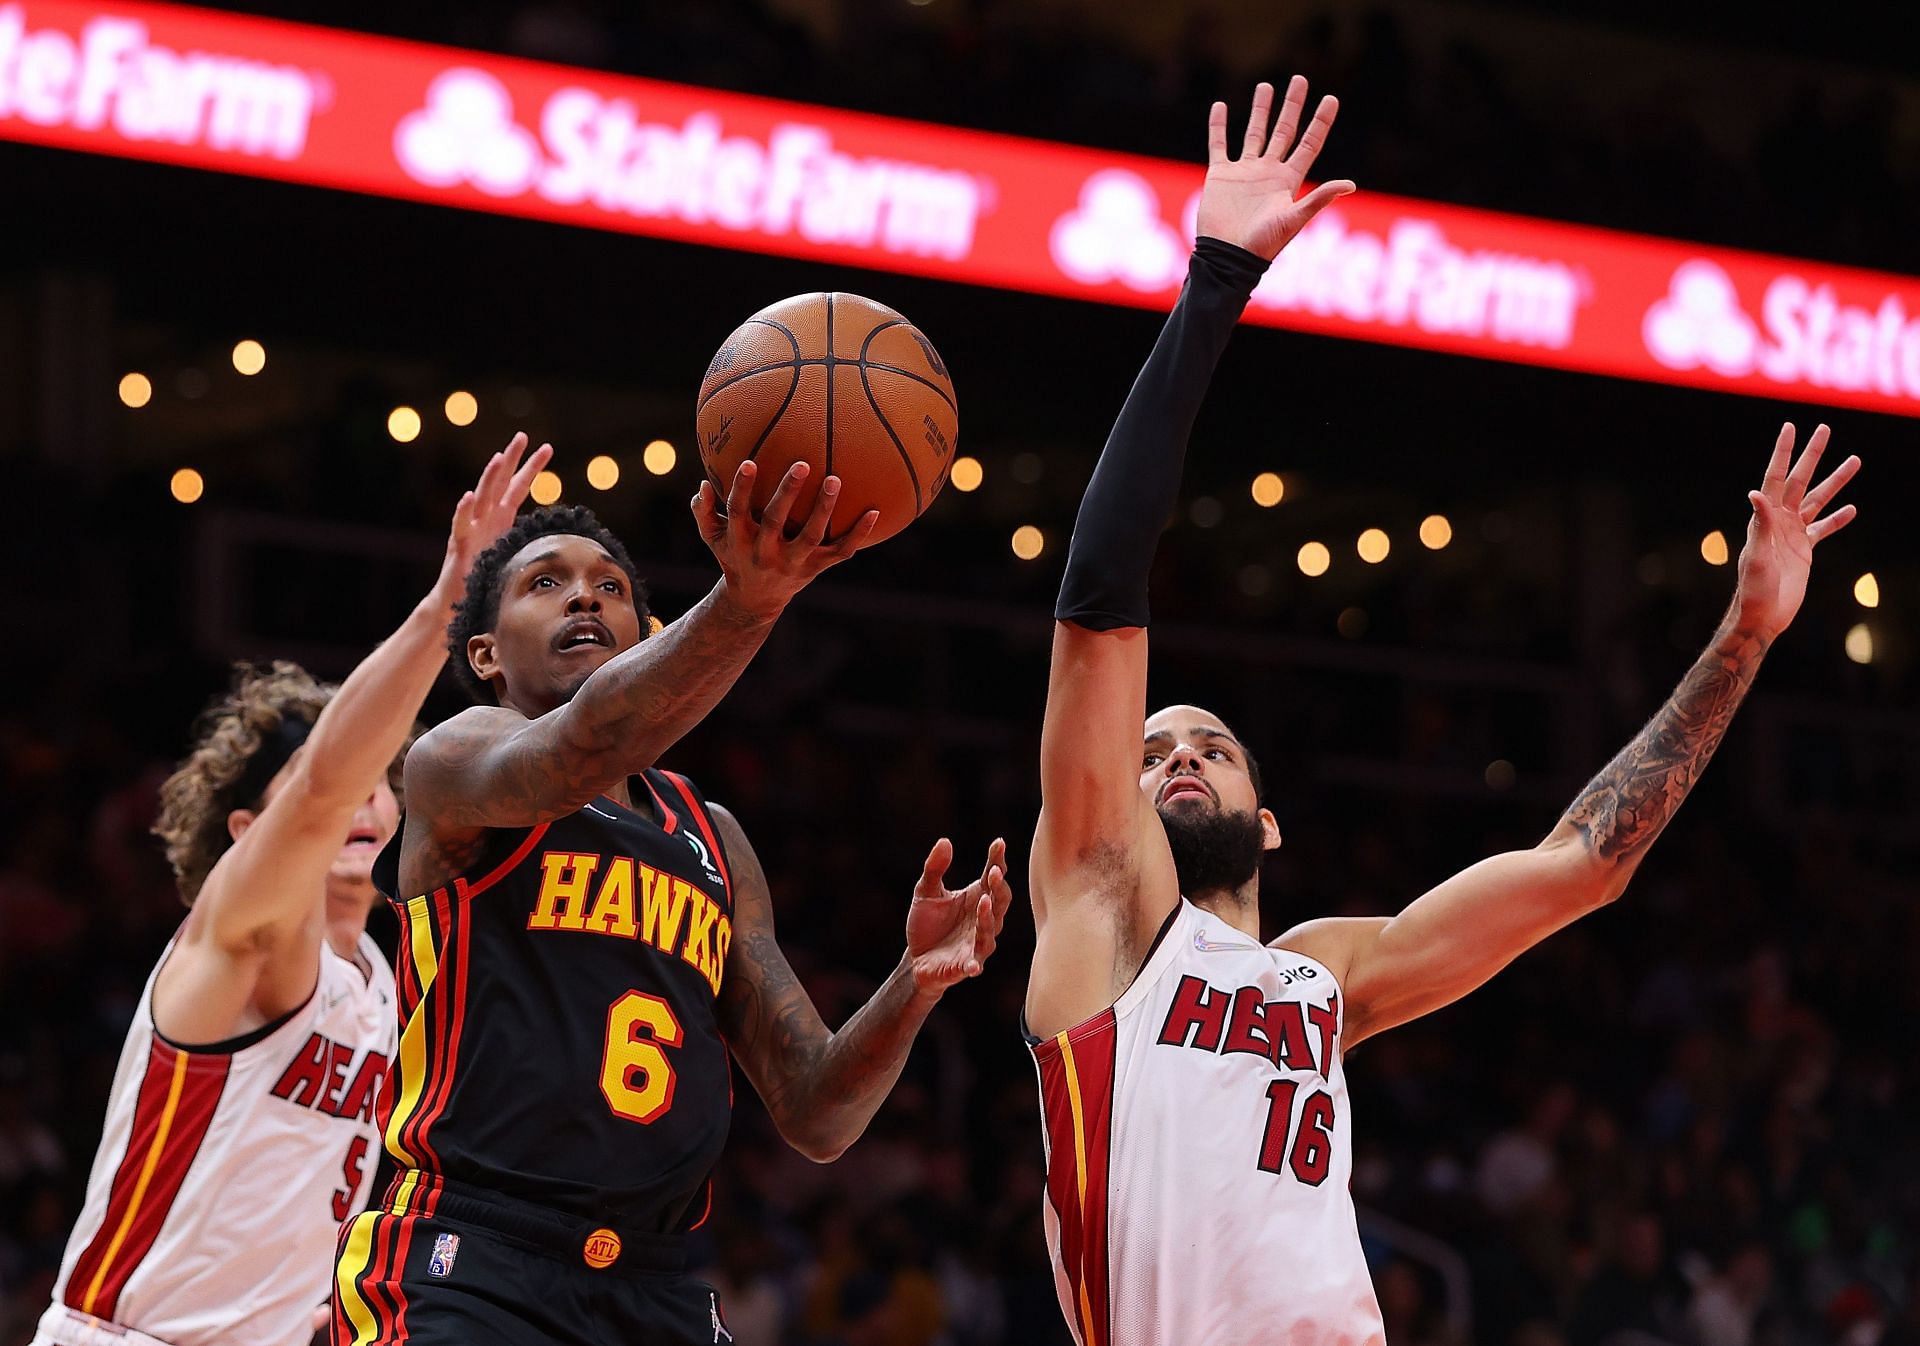 Action from the NBA game between the Miami Heat and the Atlanta Hawks